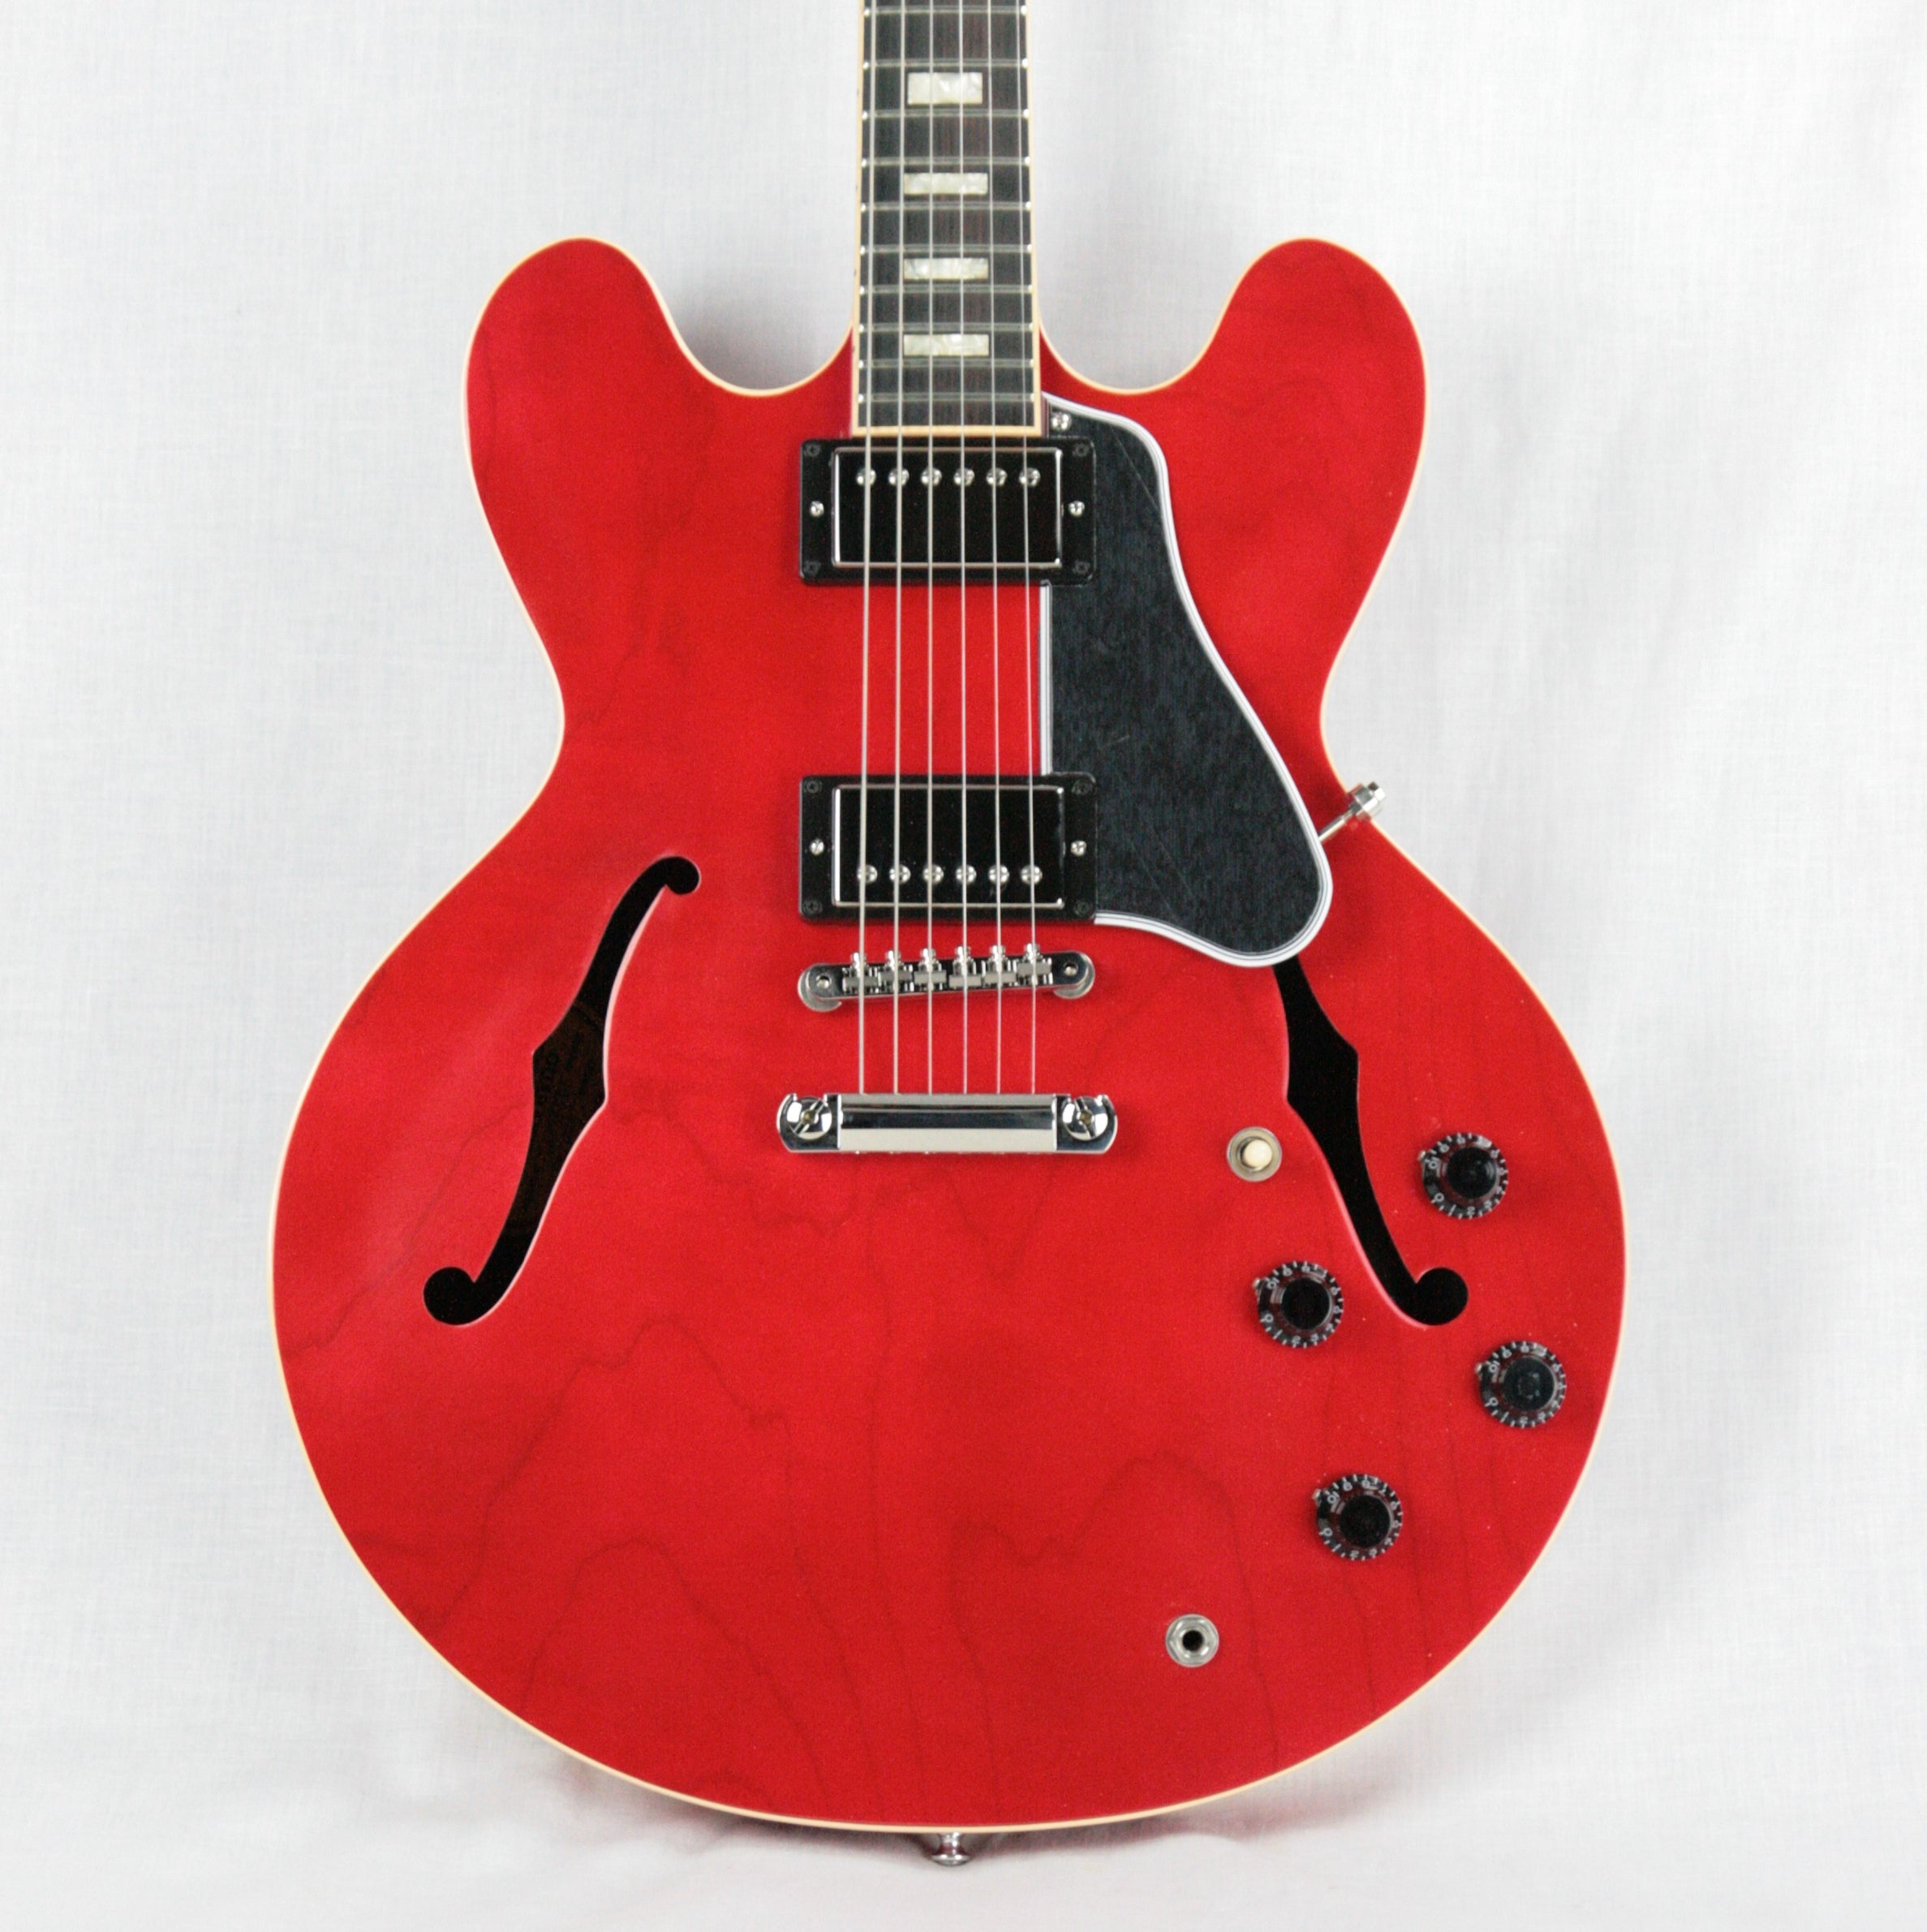 *SOLD*  2016 Gibson ES-335 CHERRY RED Gloss! Block inlays! Memphis 345 355